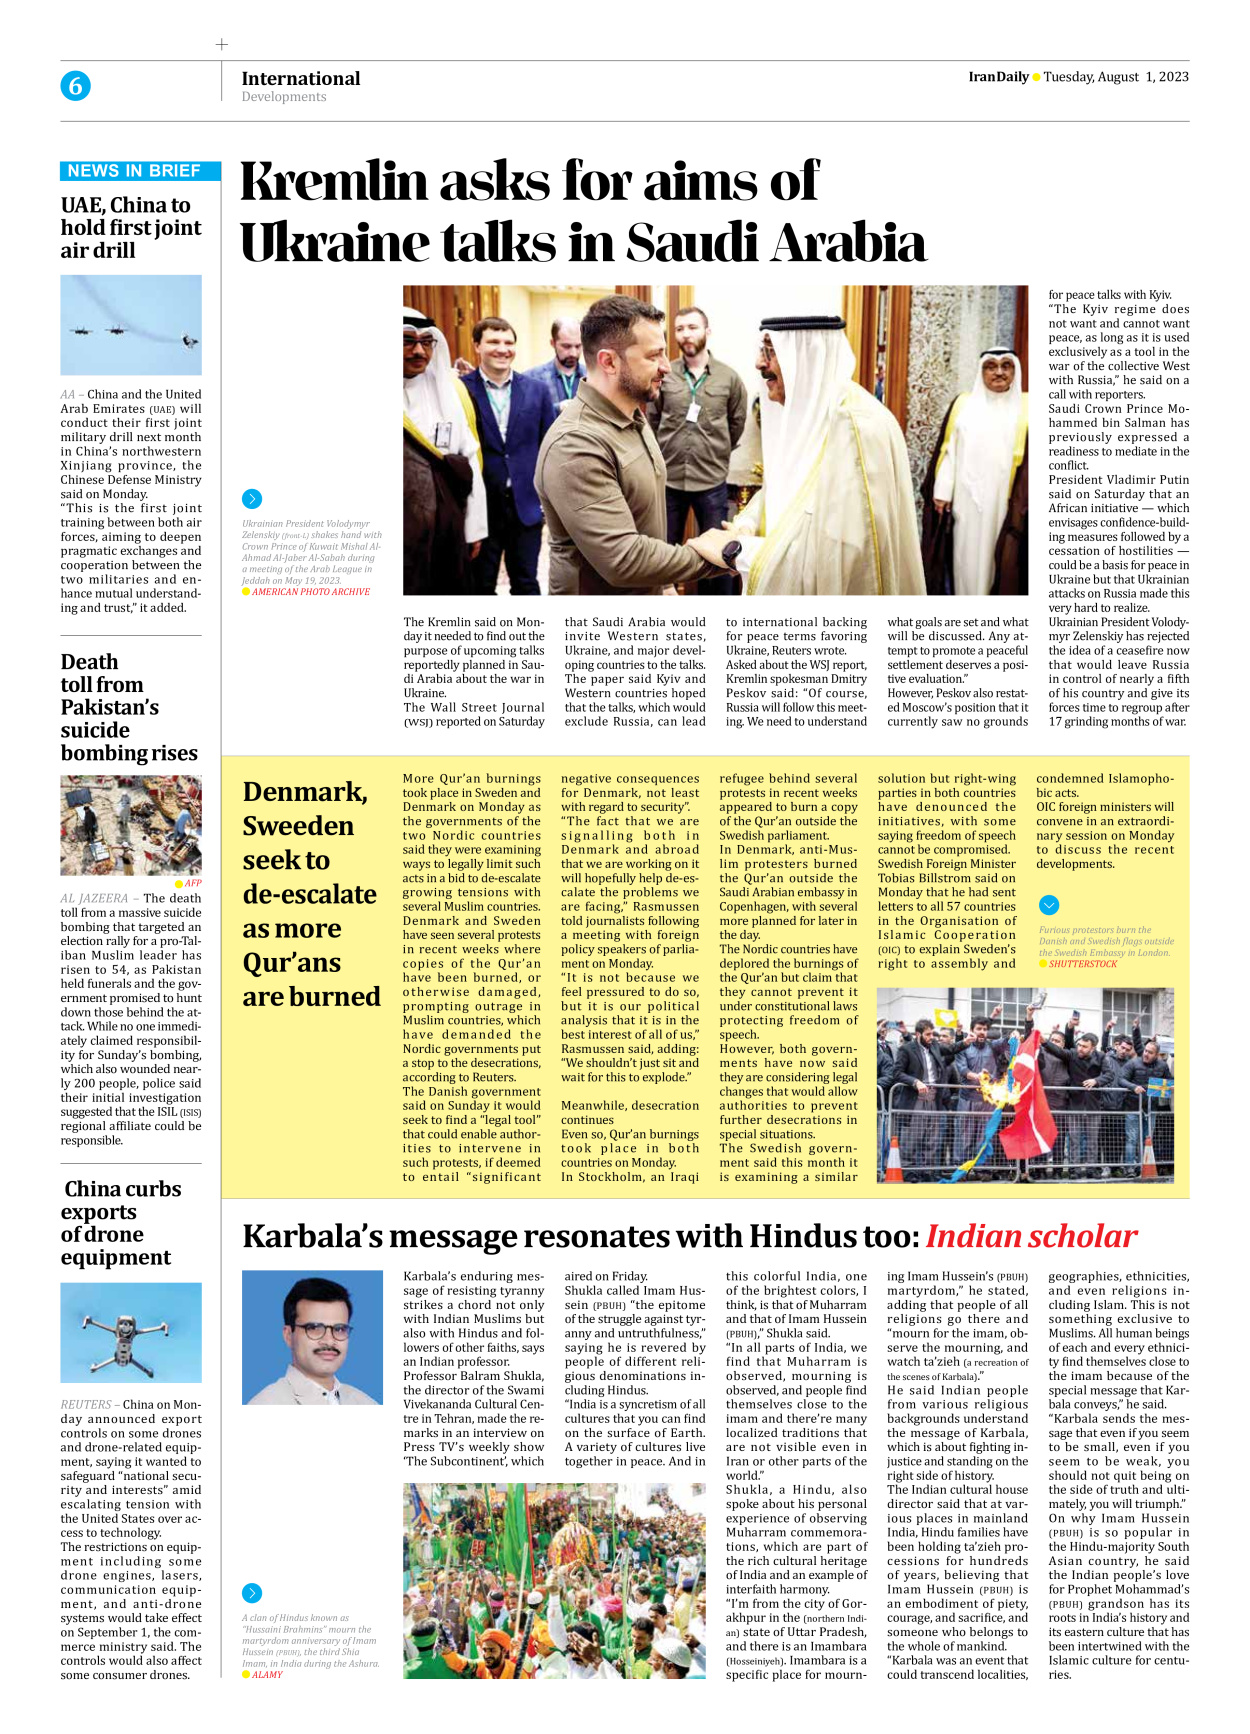 Iran Daily - Number Seven Thousand Three Hundred and Fifty Three - 01 August 2023 - Page 6